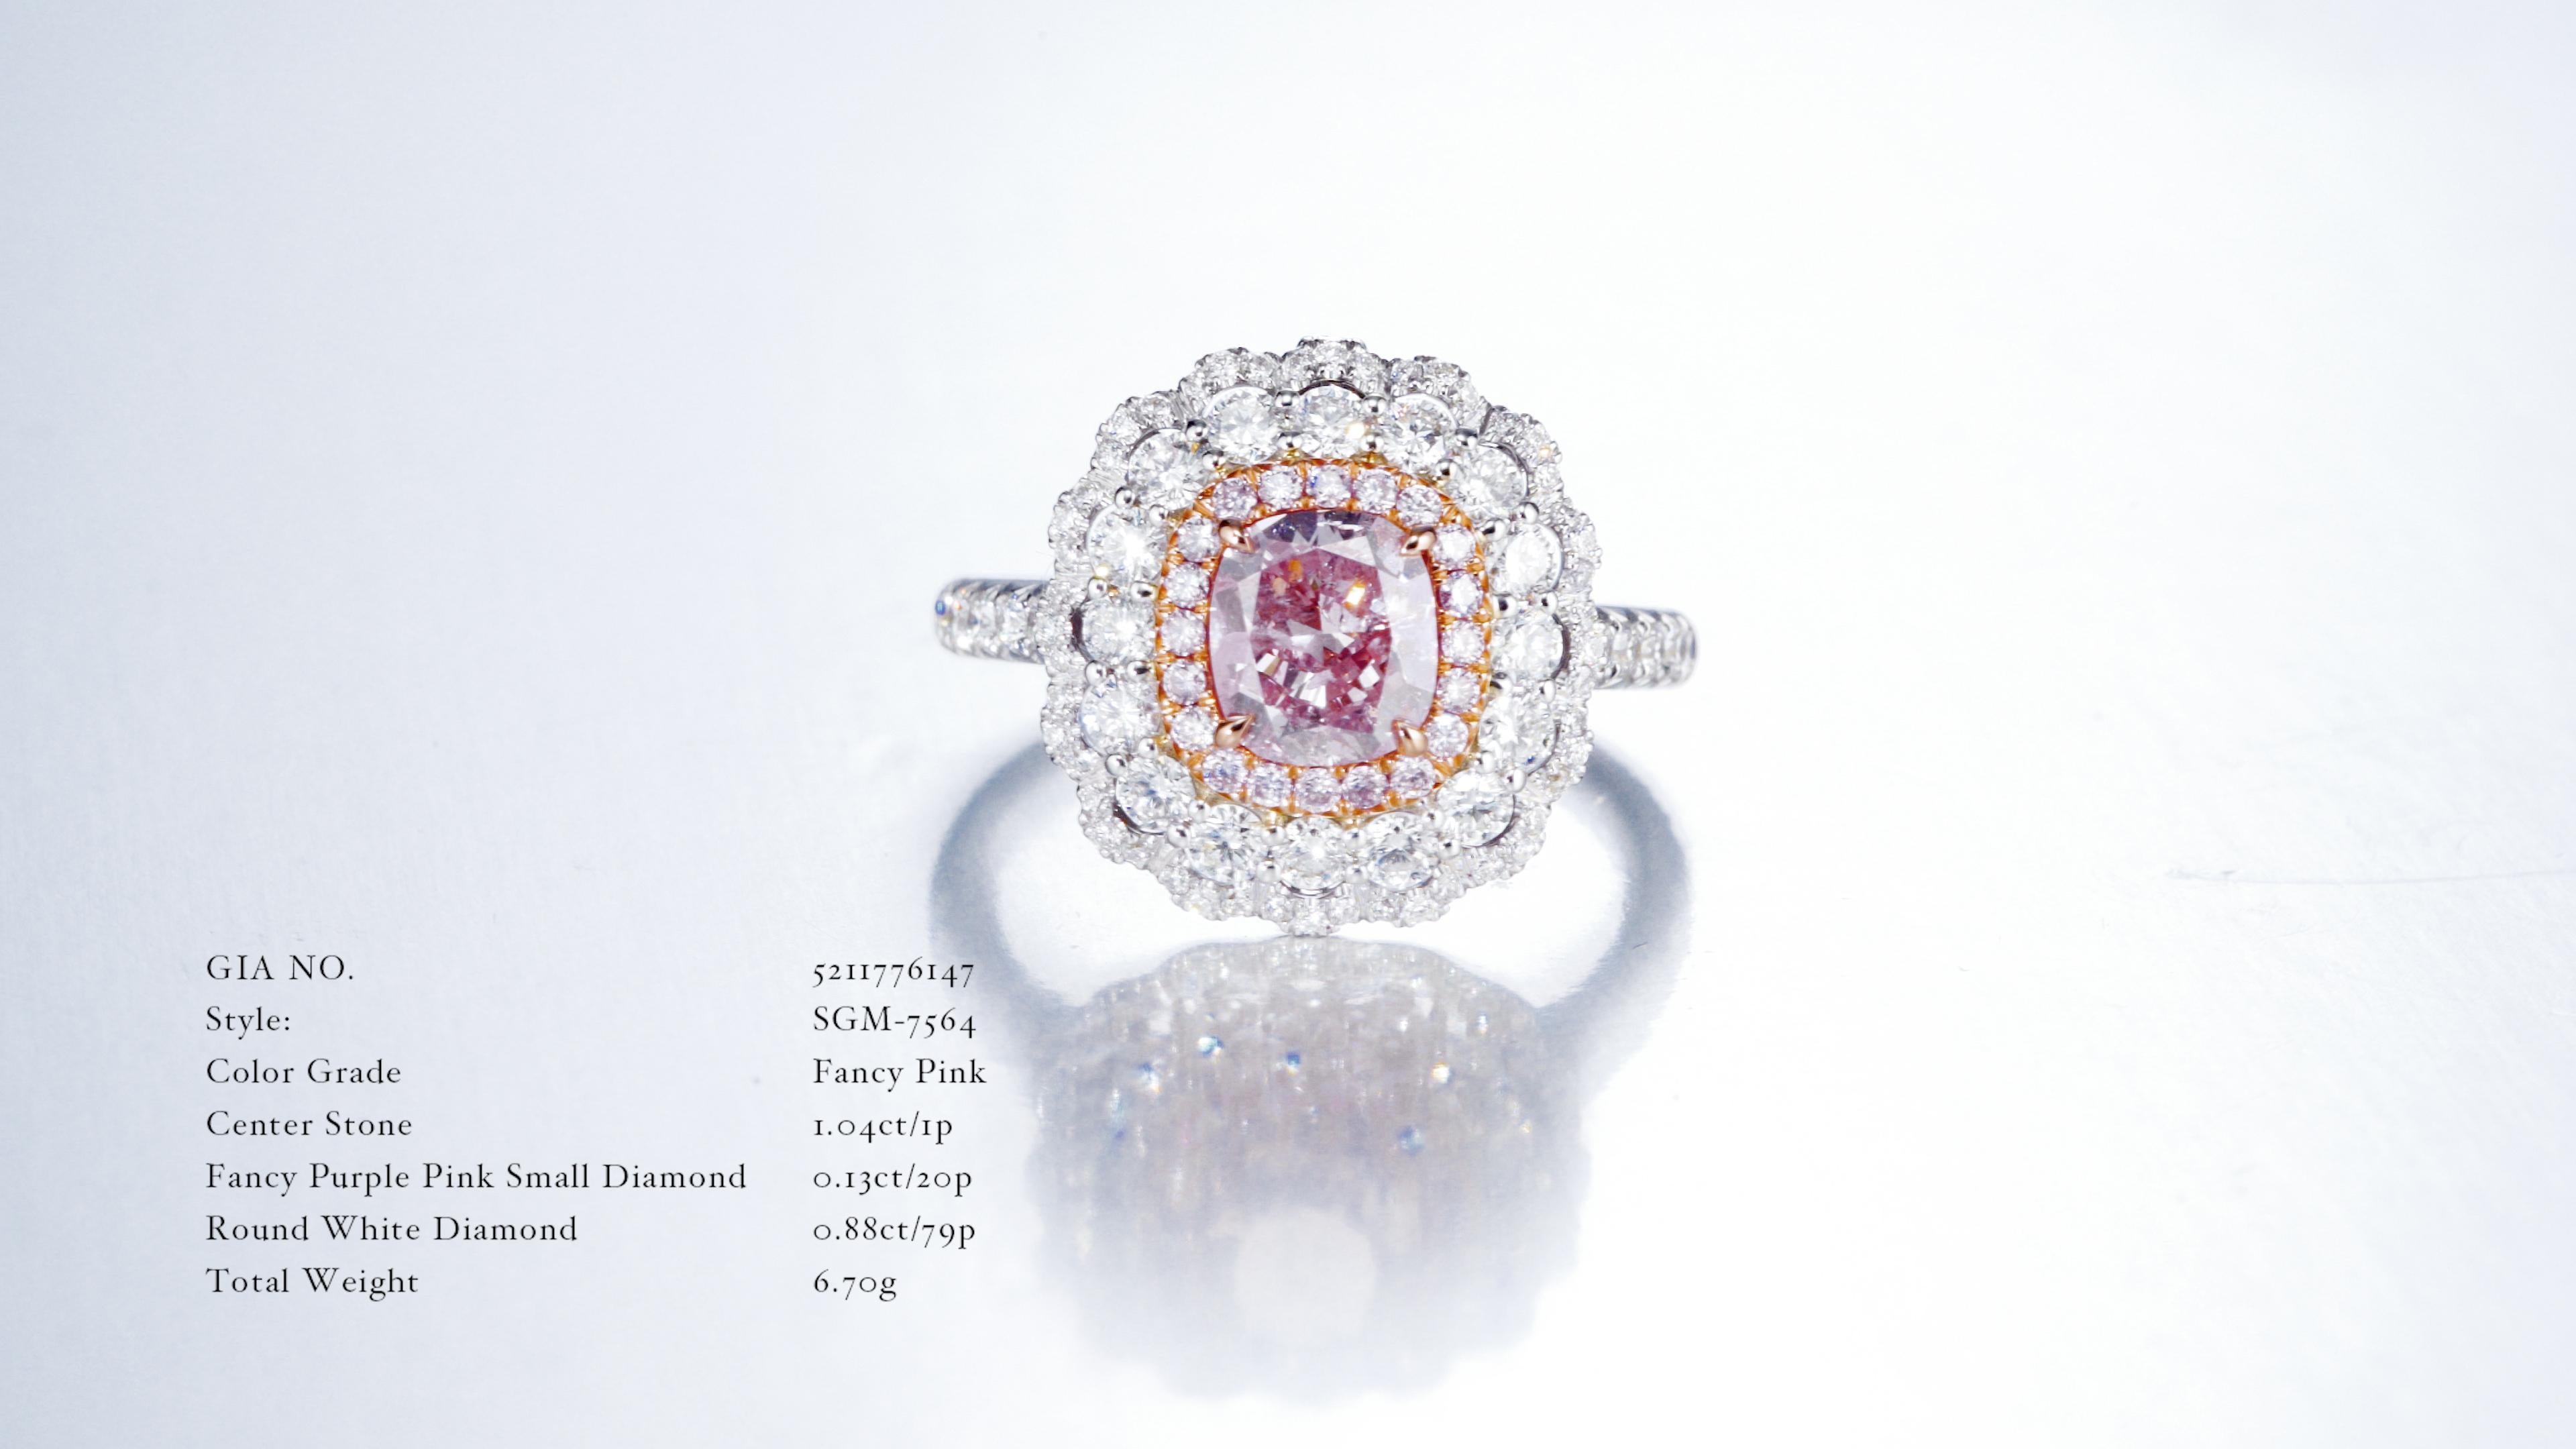 Elevate your jewelry collection with the enchanting allure of this GIA Certified 1.04 carat Natural Fancy Pink Cushion Shape Diamond Ring. The center stone, with its vivid pink hue and cushion cut, radiates a timeless charm, serving as the focal